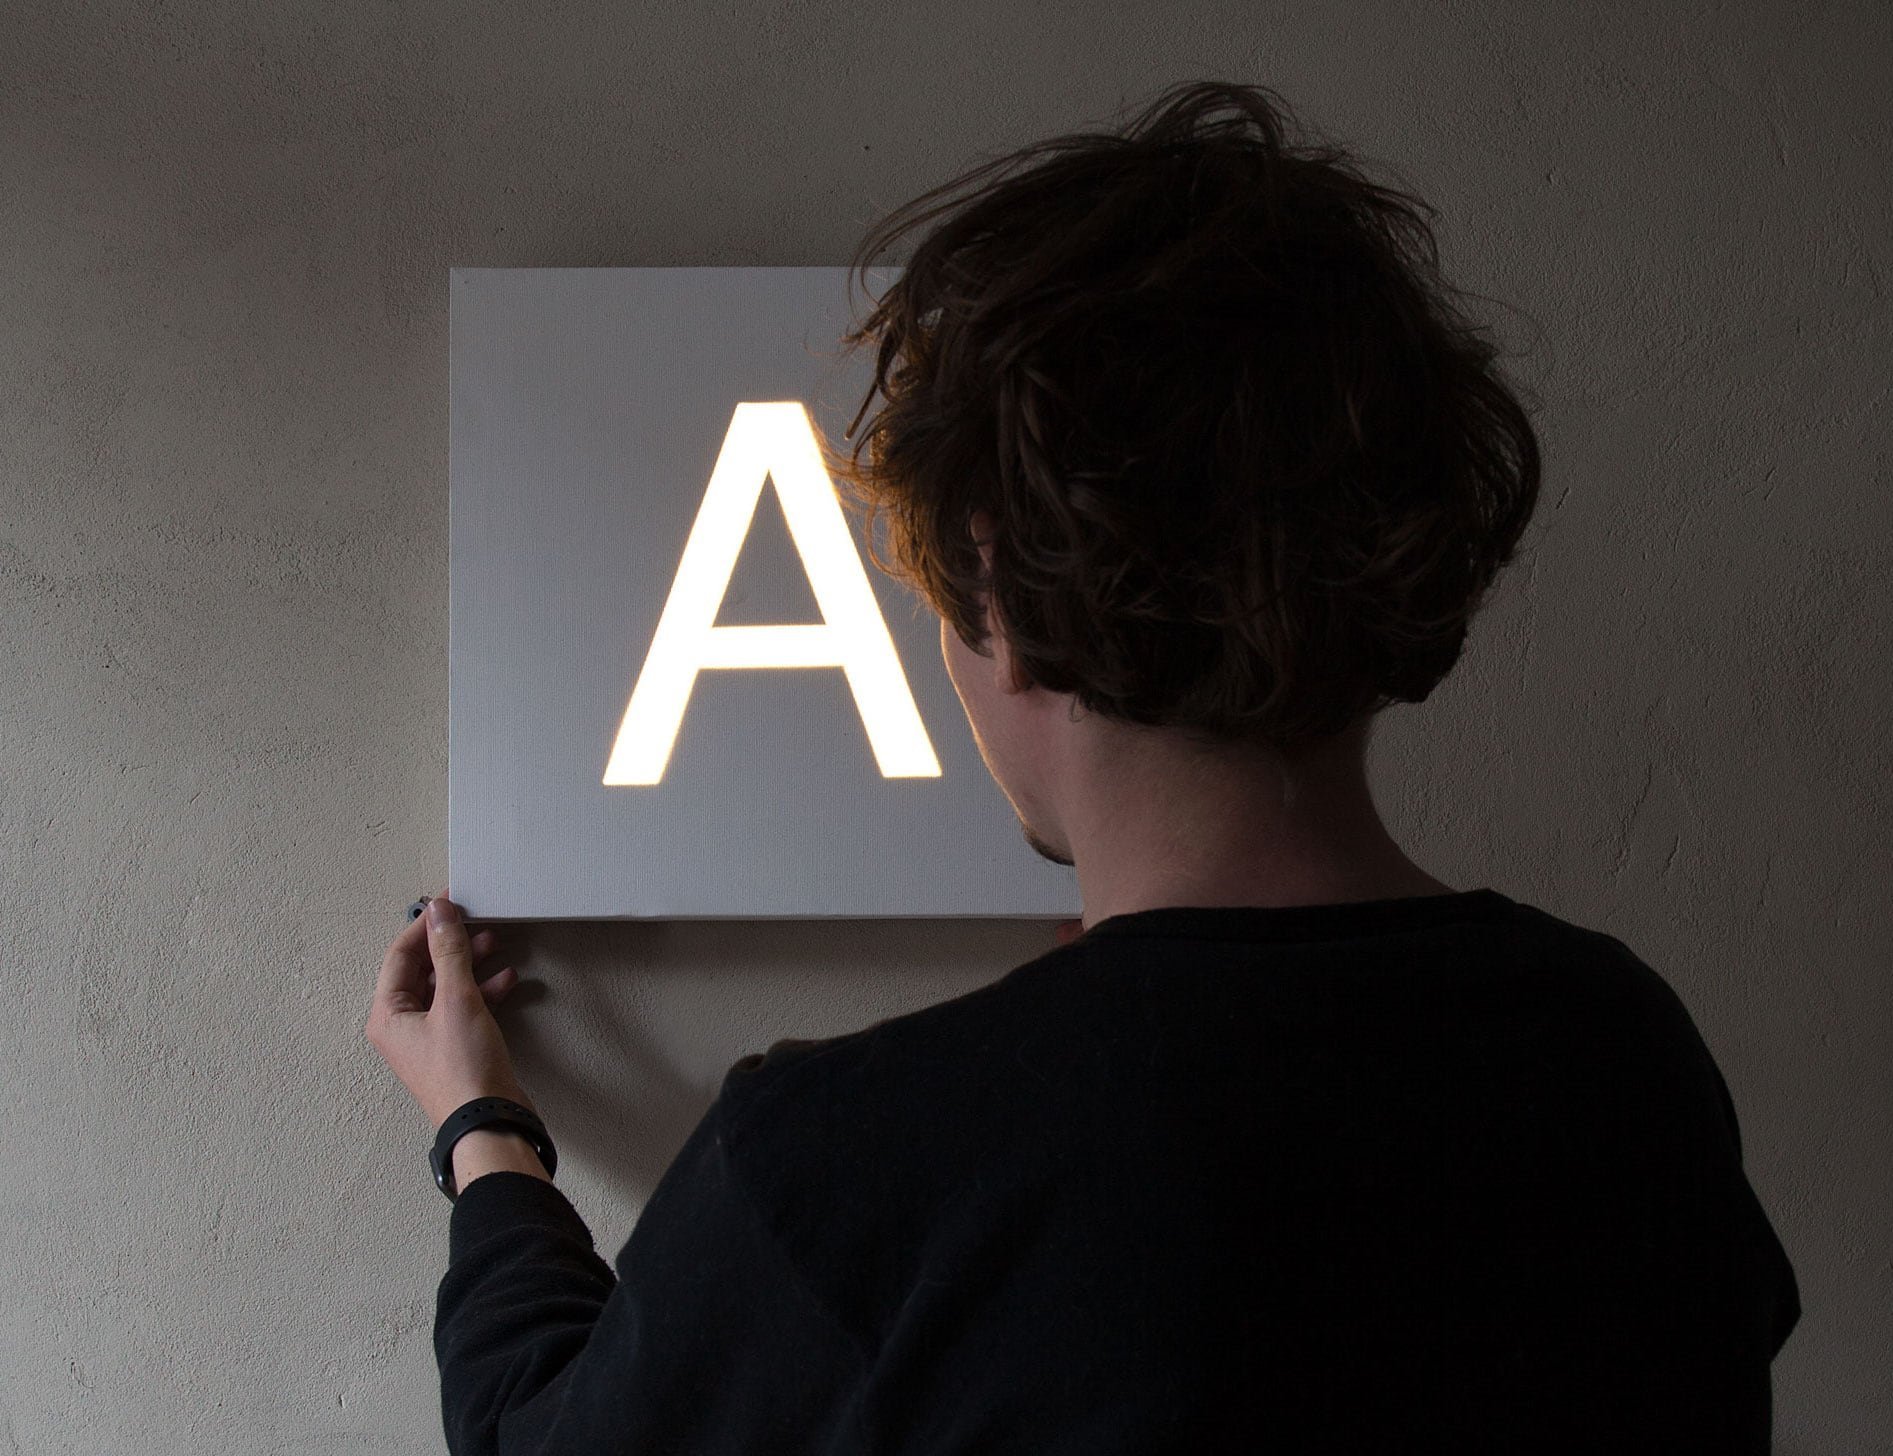 Nottdesign Customizable Wall Light is simple, functional wall decor for the home or office